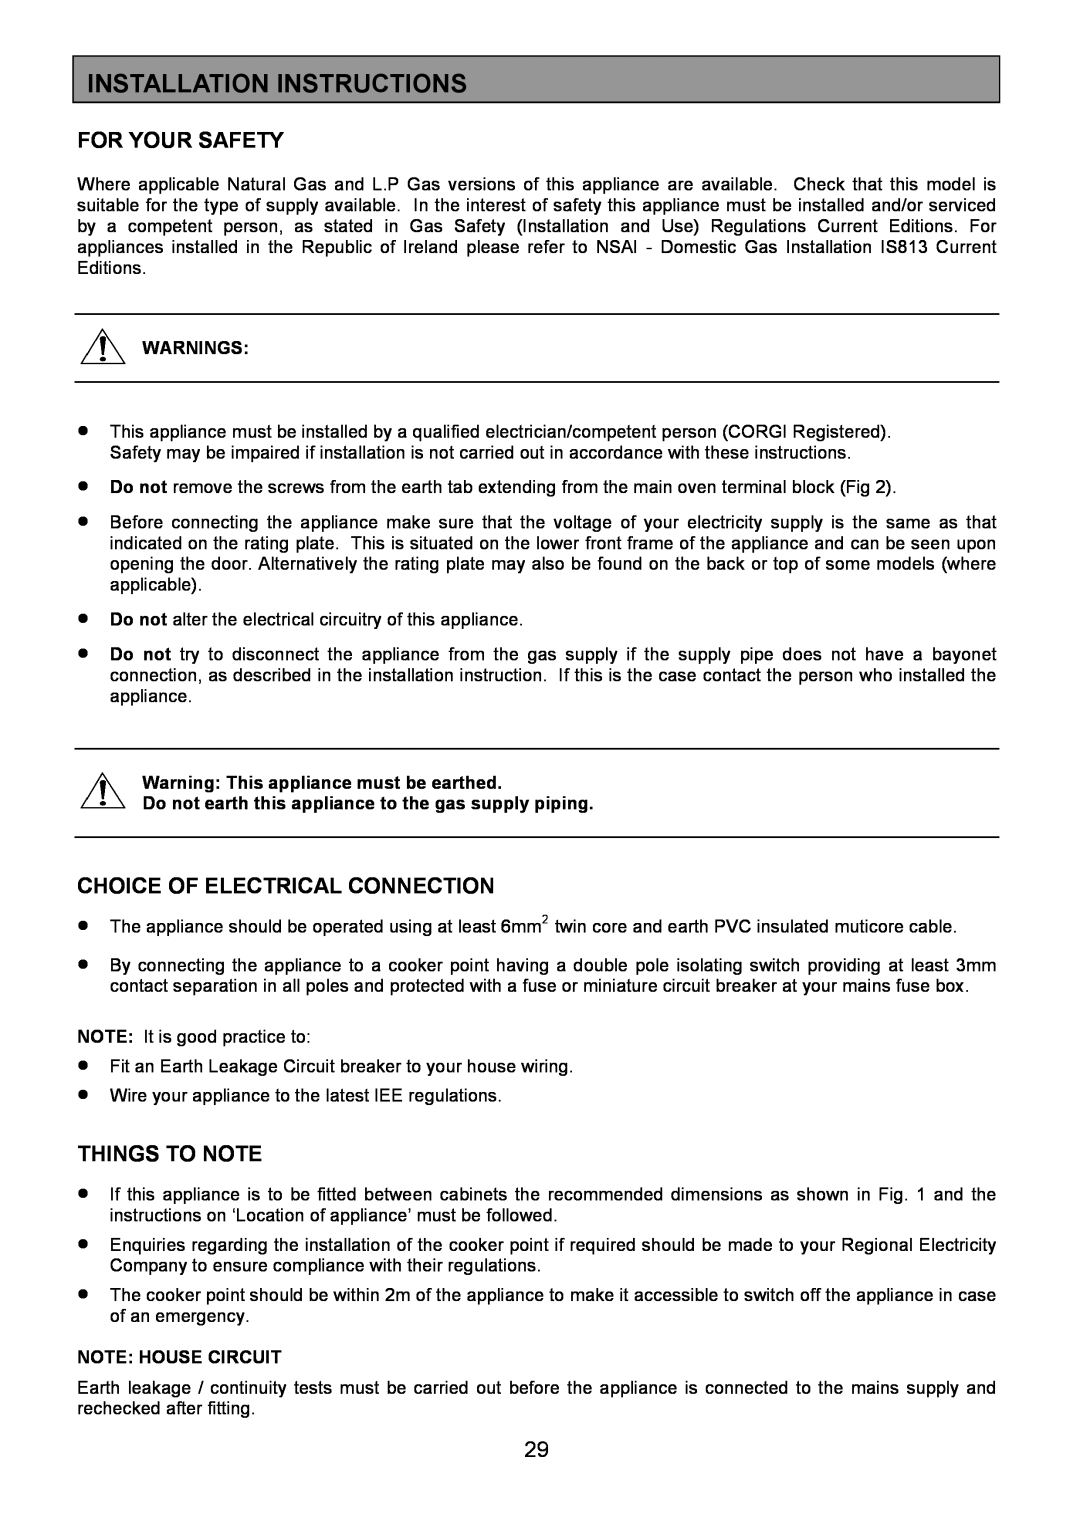 Zanussi ZCM 8021 Installation Instructions, For Your Safety, Choice Of Electrical Connection, Things To Note, Warnings 